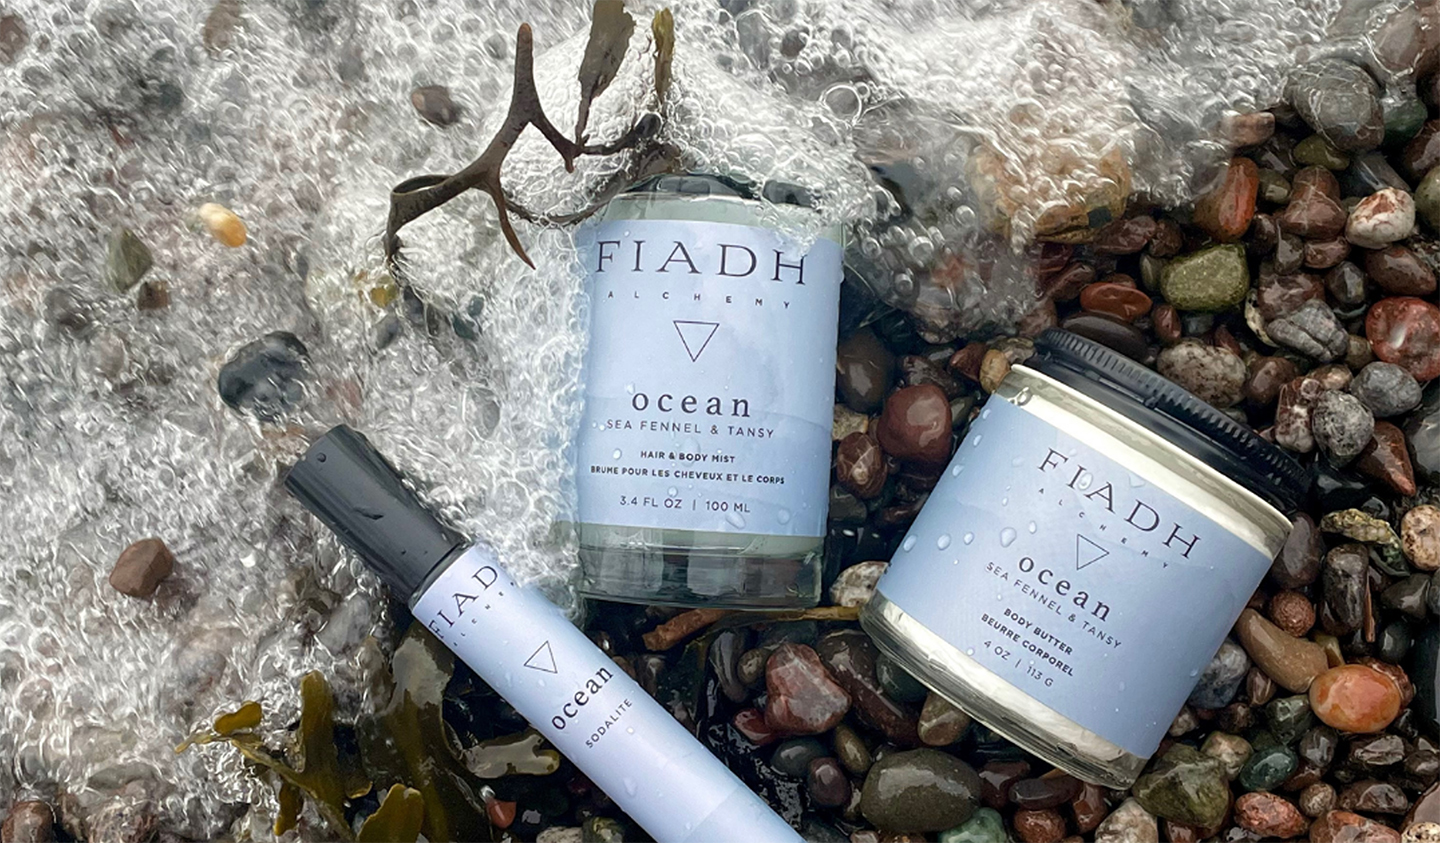 Fiadh (FEE-ah) Alchemy – A Botanical Self-Care Line Inspired by the Elements